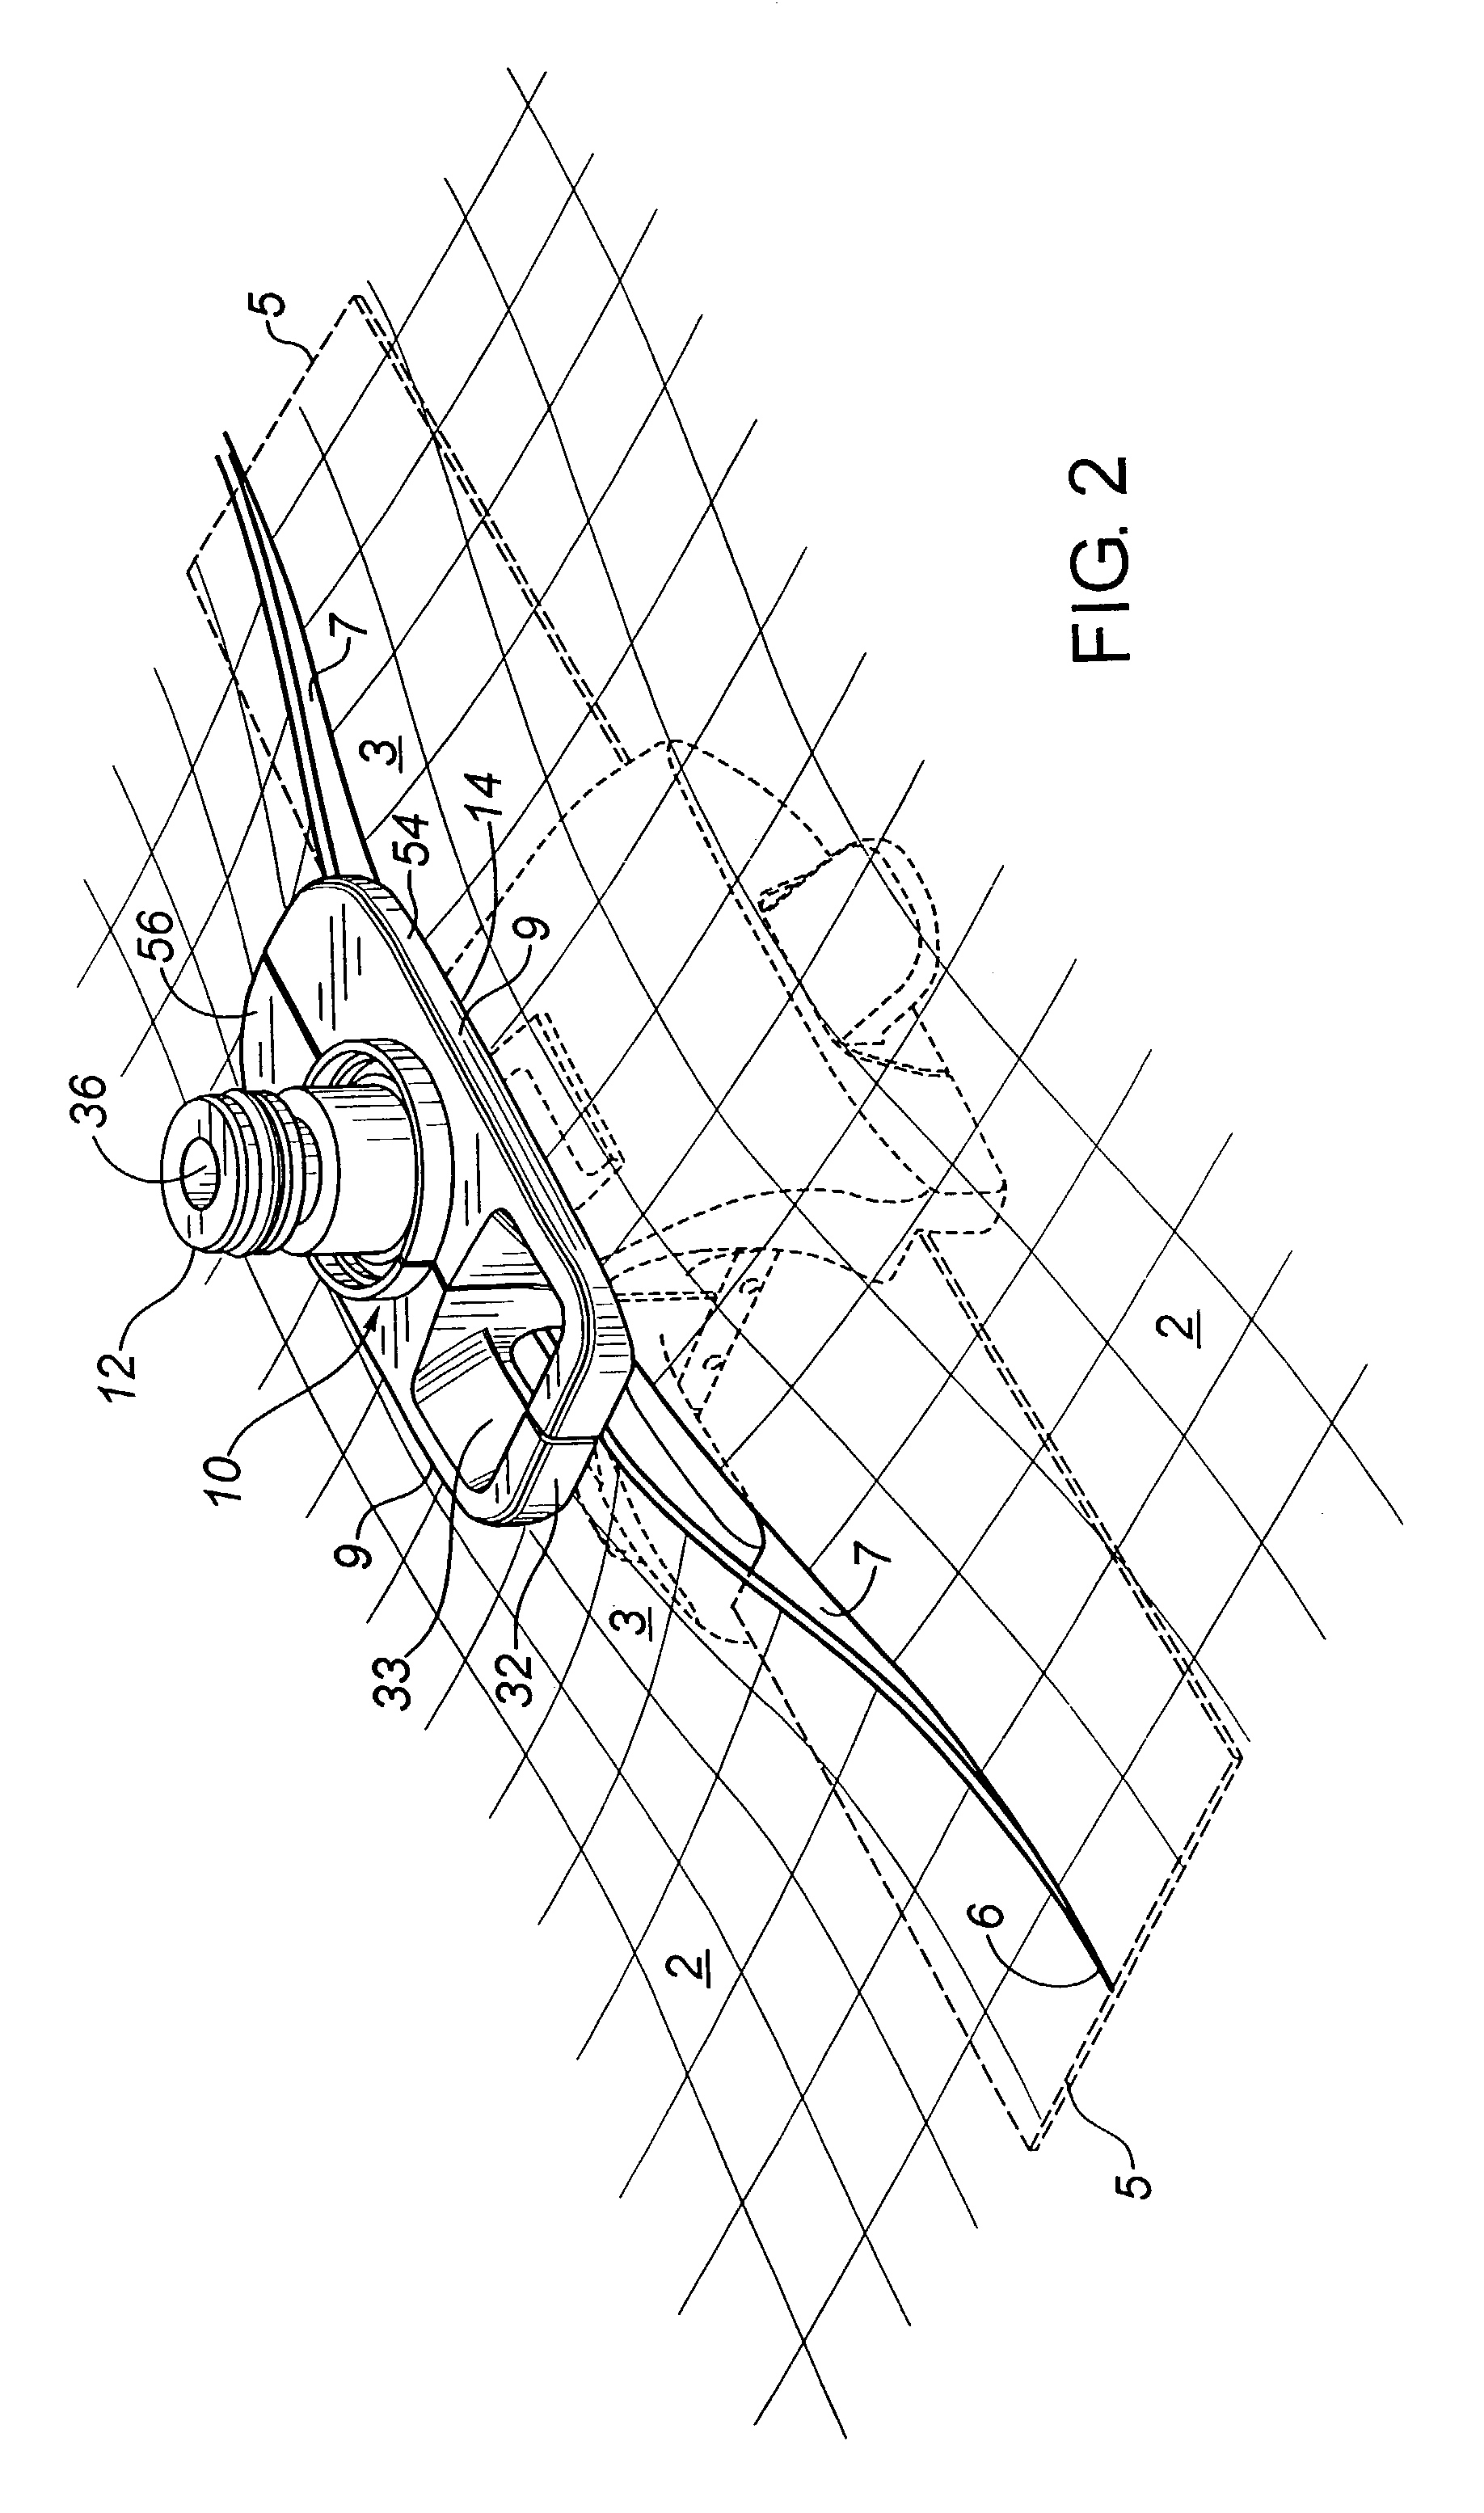 Method and apparatus for seaming abutting layers of planar material